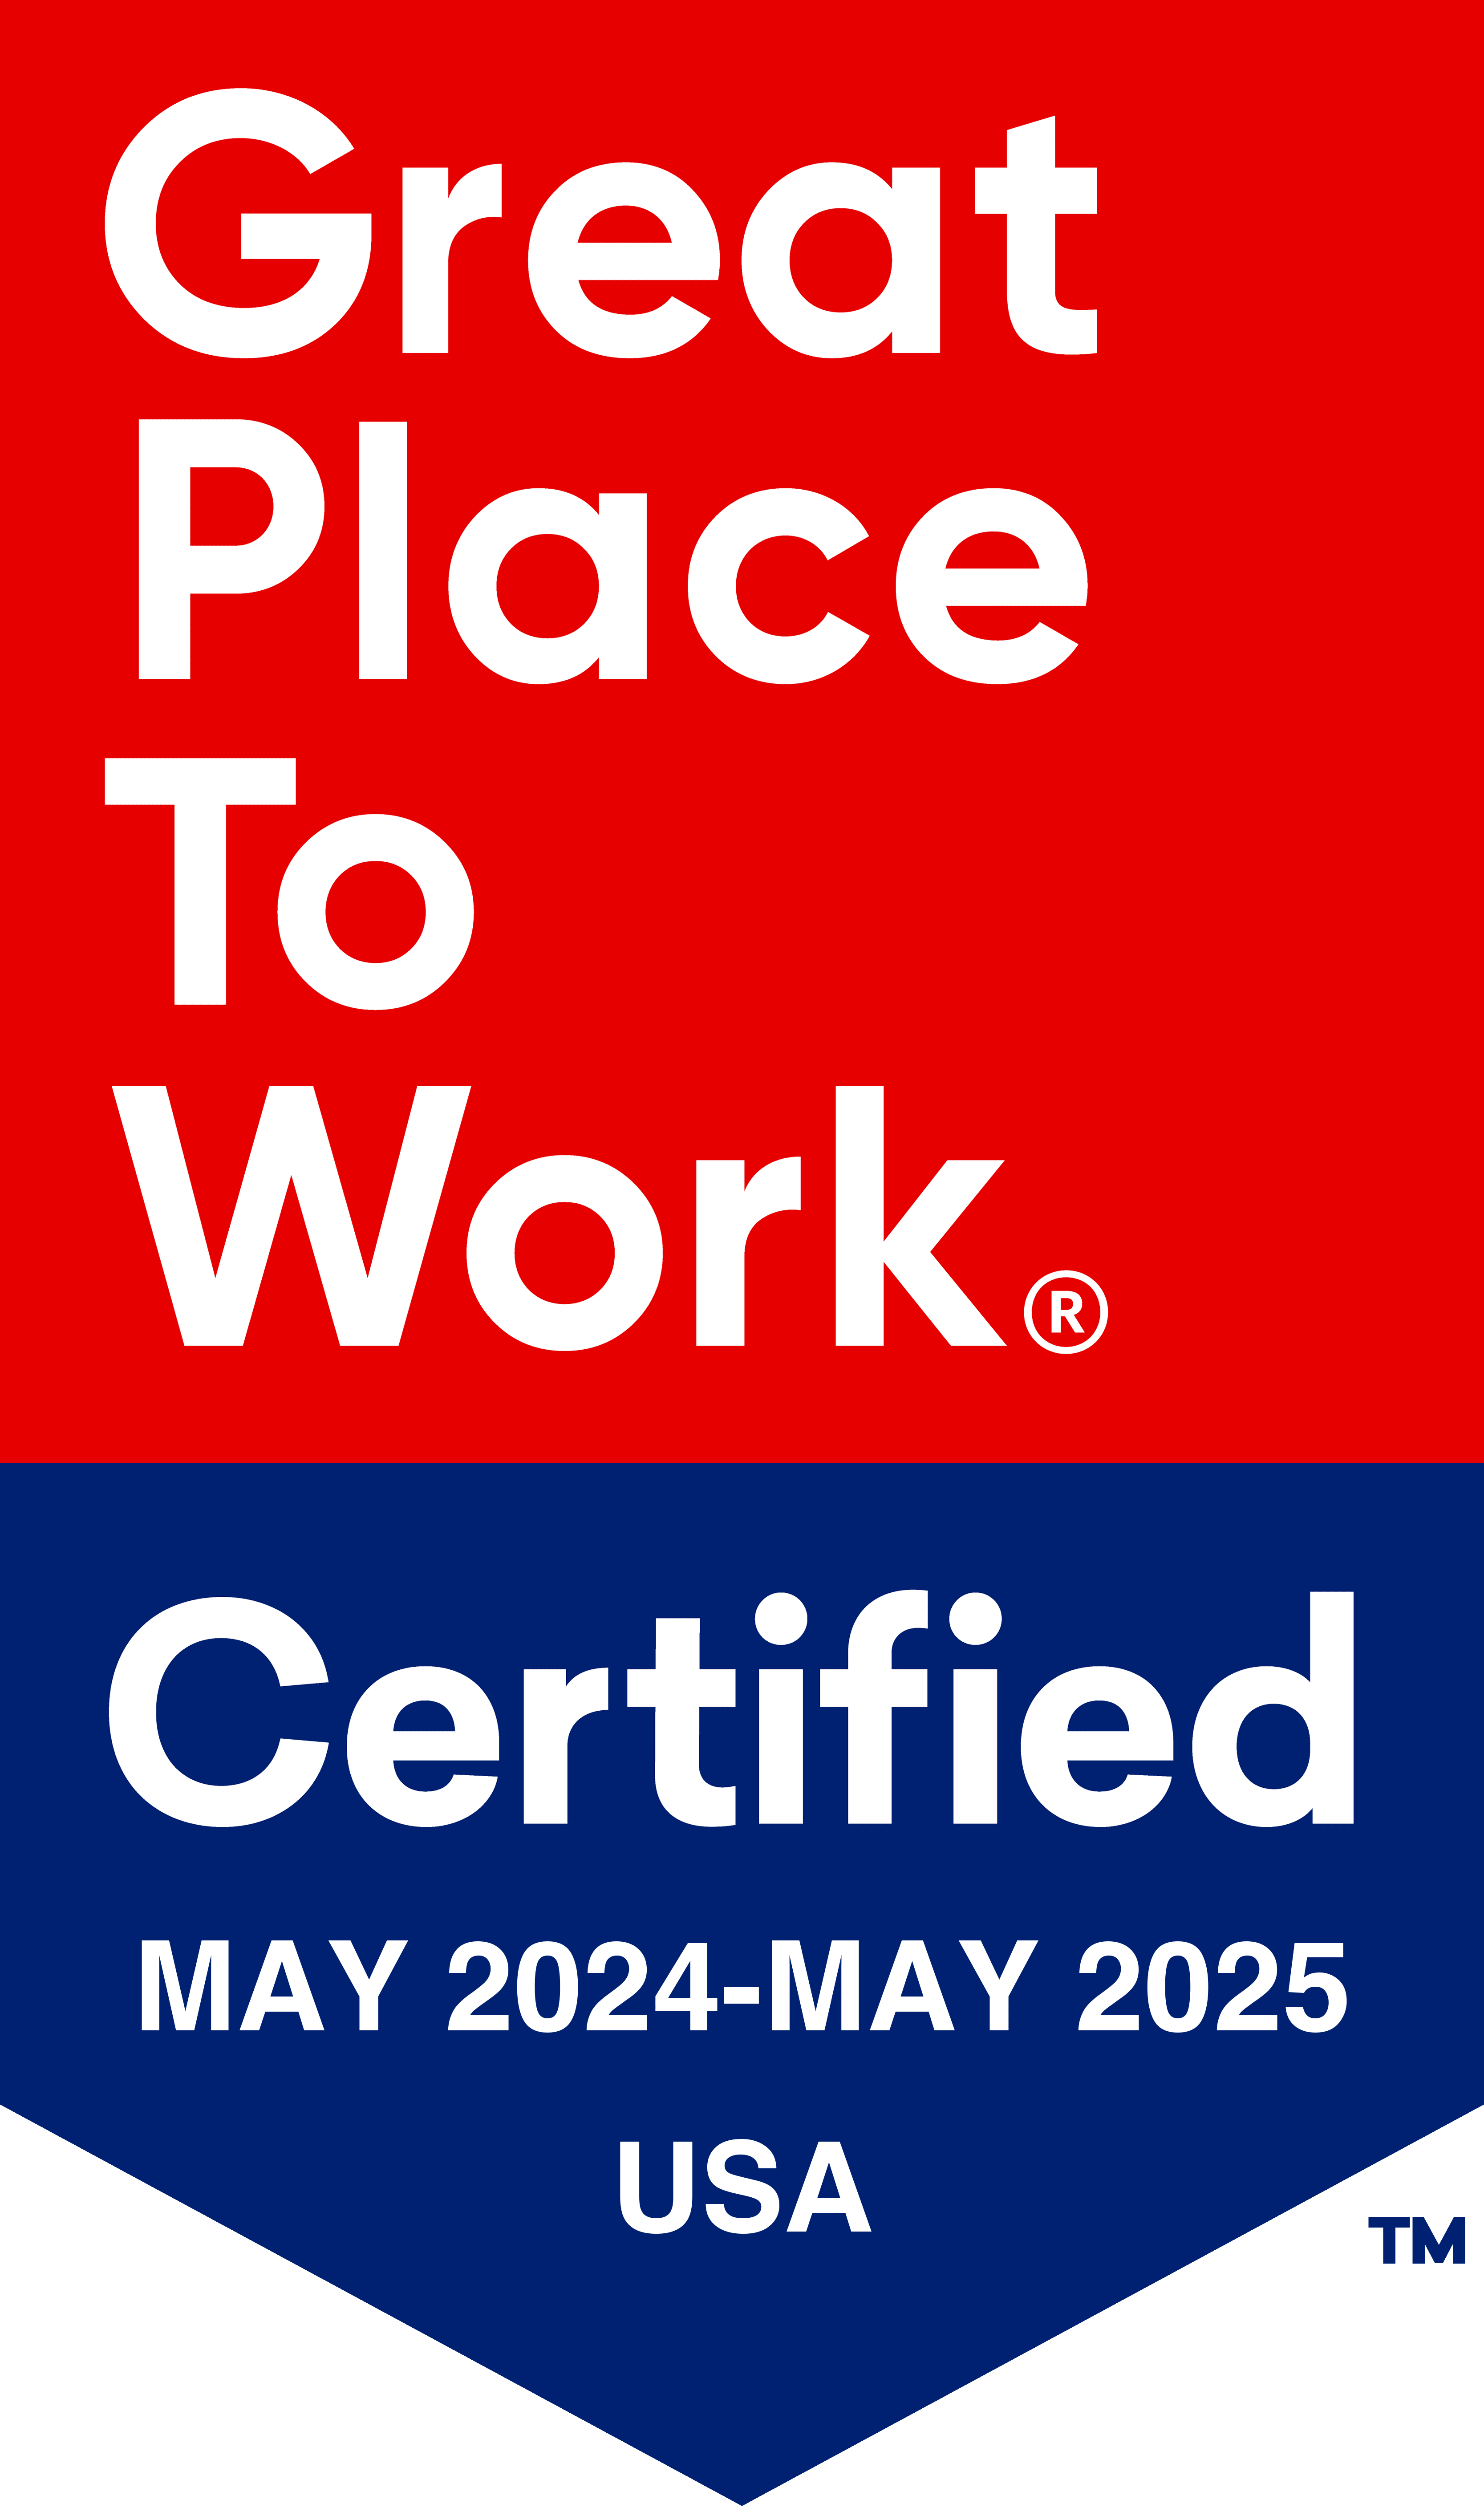 Great place to work logo for Clearwater at Rancharrah in Reno, Nevada